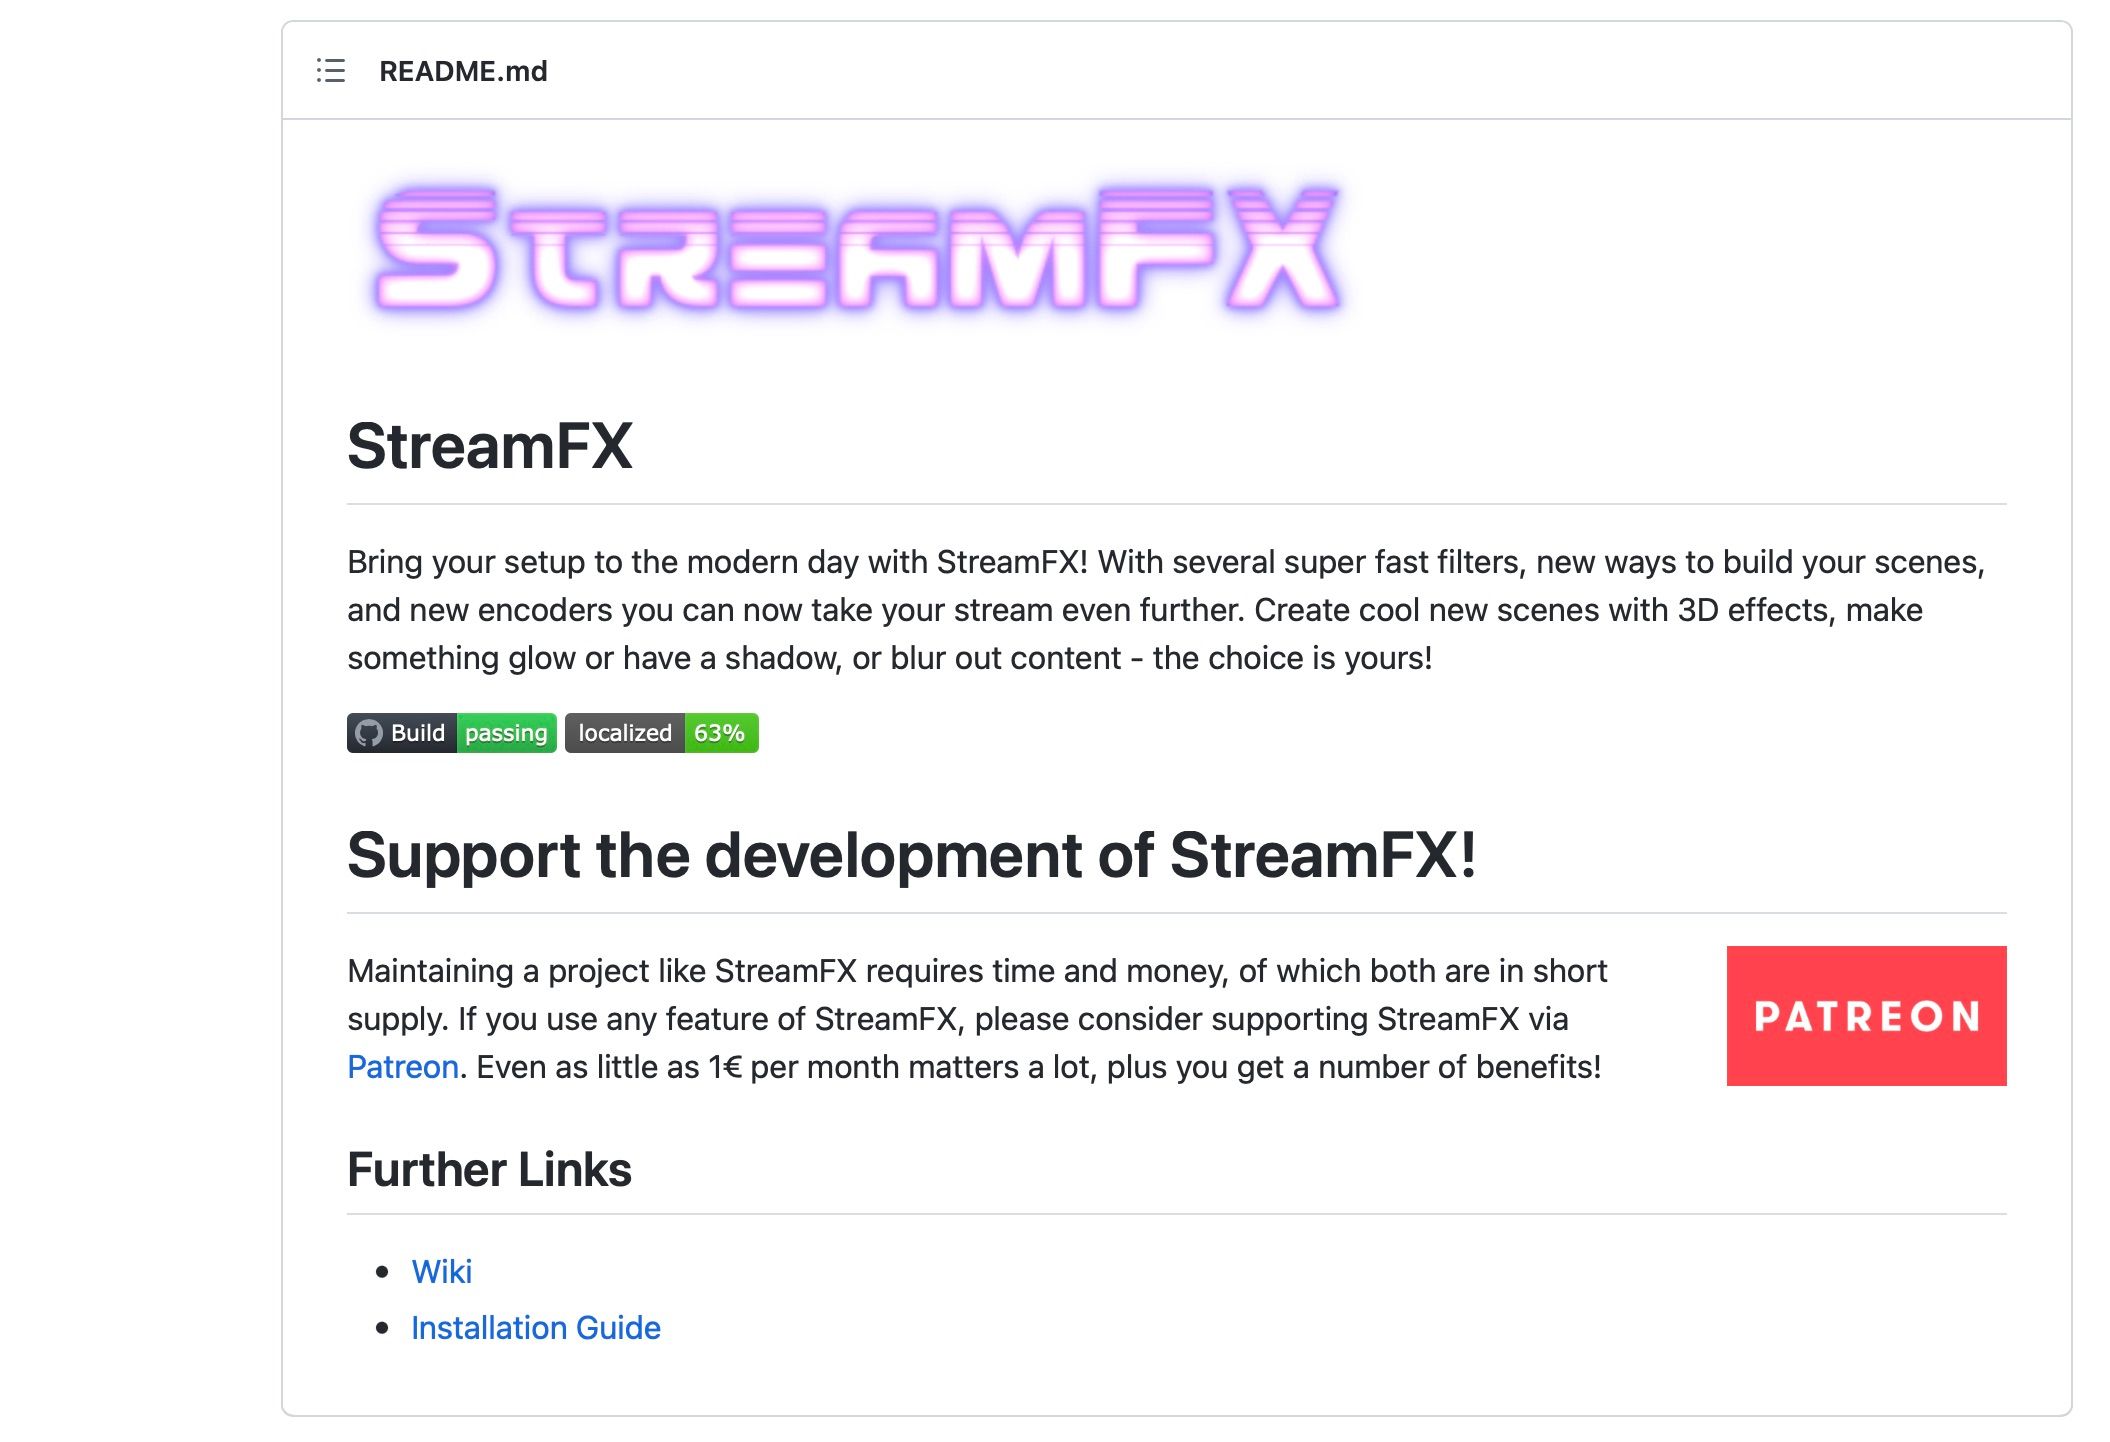 Screenshot of the StreamFX Readme section